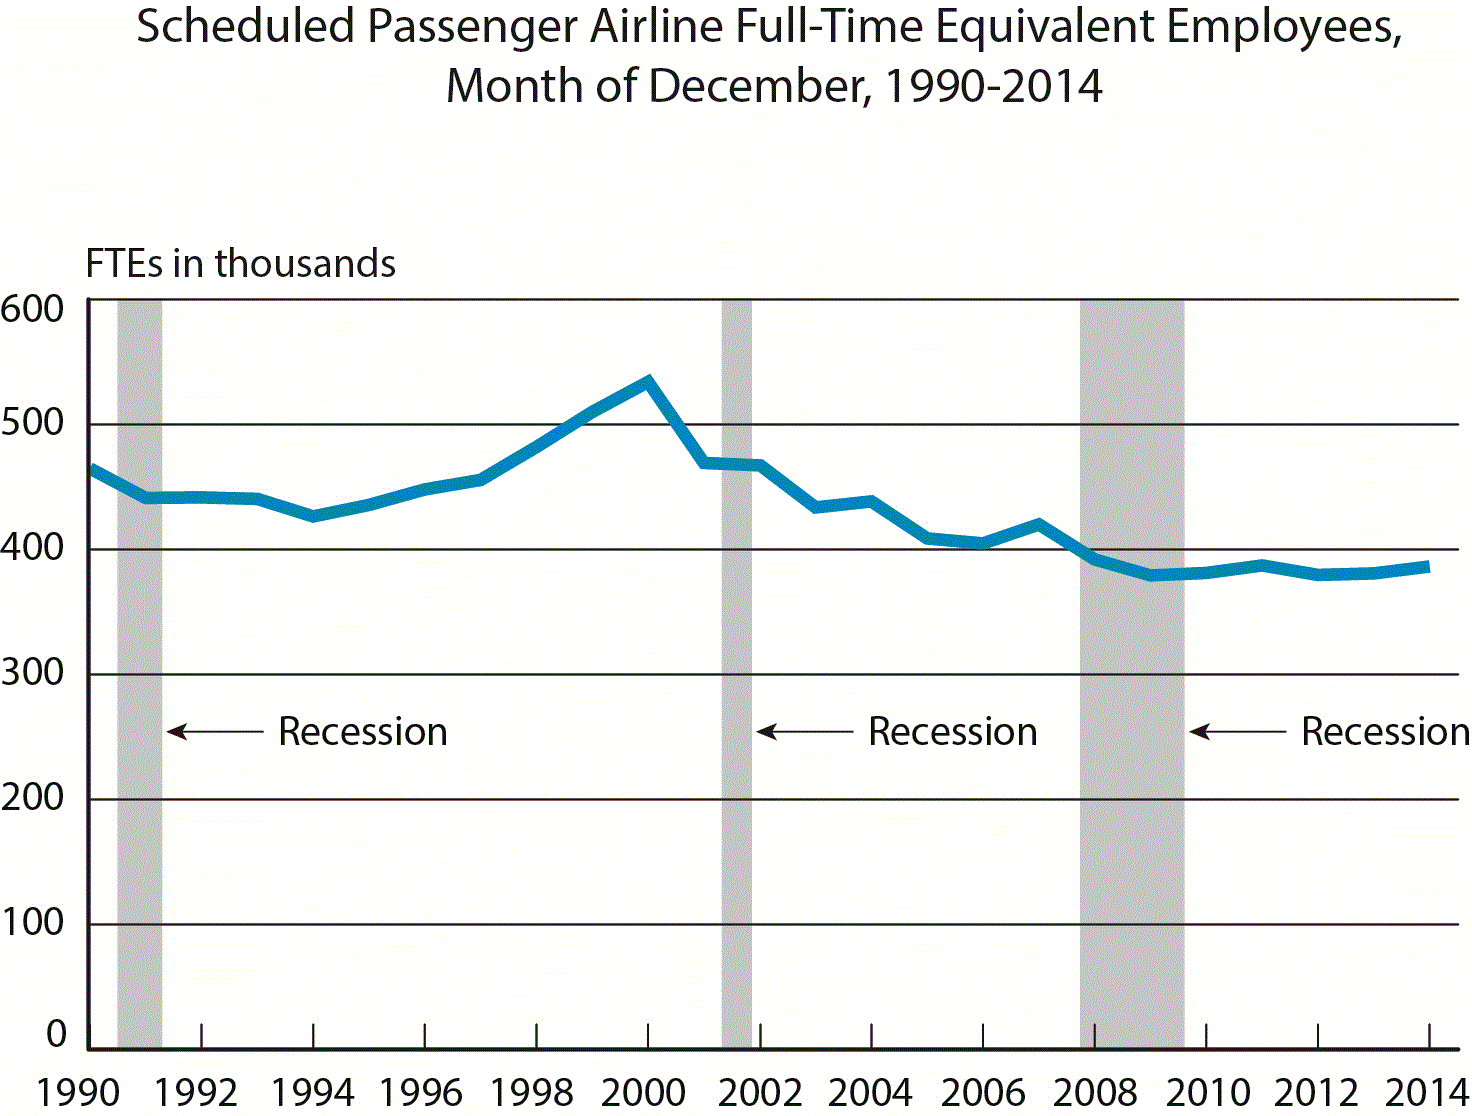 Scheduled Passenger Airline Full-Time Equivalent Employees, Month of December, 1990-2014